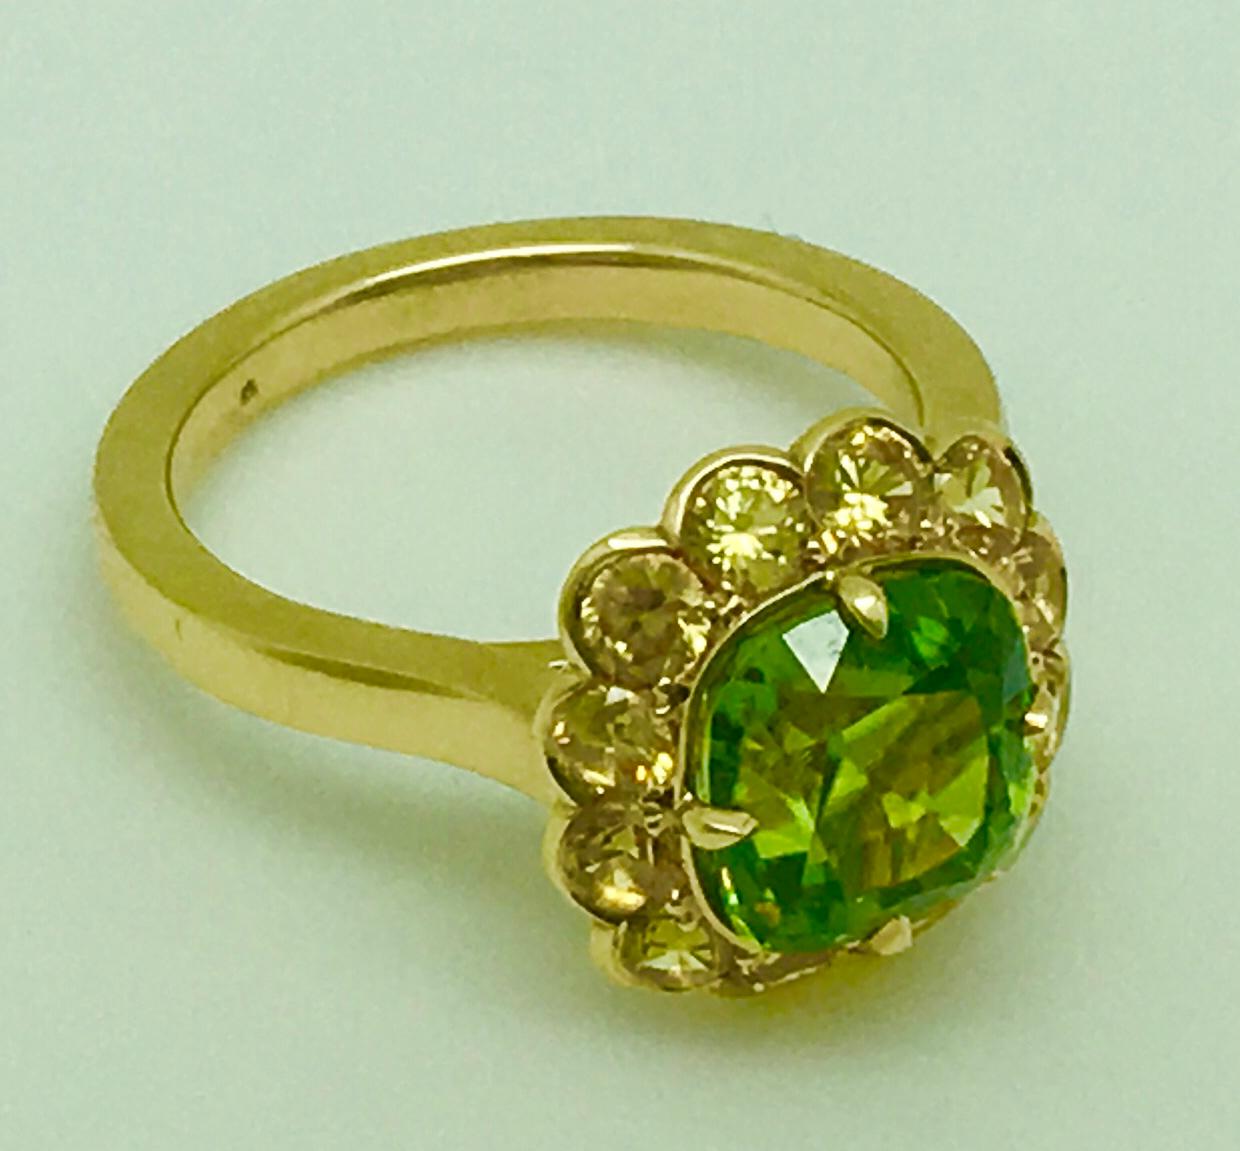 Peridot & Yellow Sapphires in a custom handcrafted 18KT Yellow Gold hand built mounting.
The Peridot is 3.16 Carats (scale weight)
The Peridot: Hue; Green with very slight yellow undertone,
Intensity: Vivid, Tone: Medium. Make is very good.
There